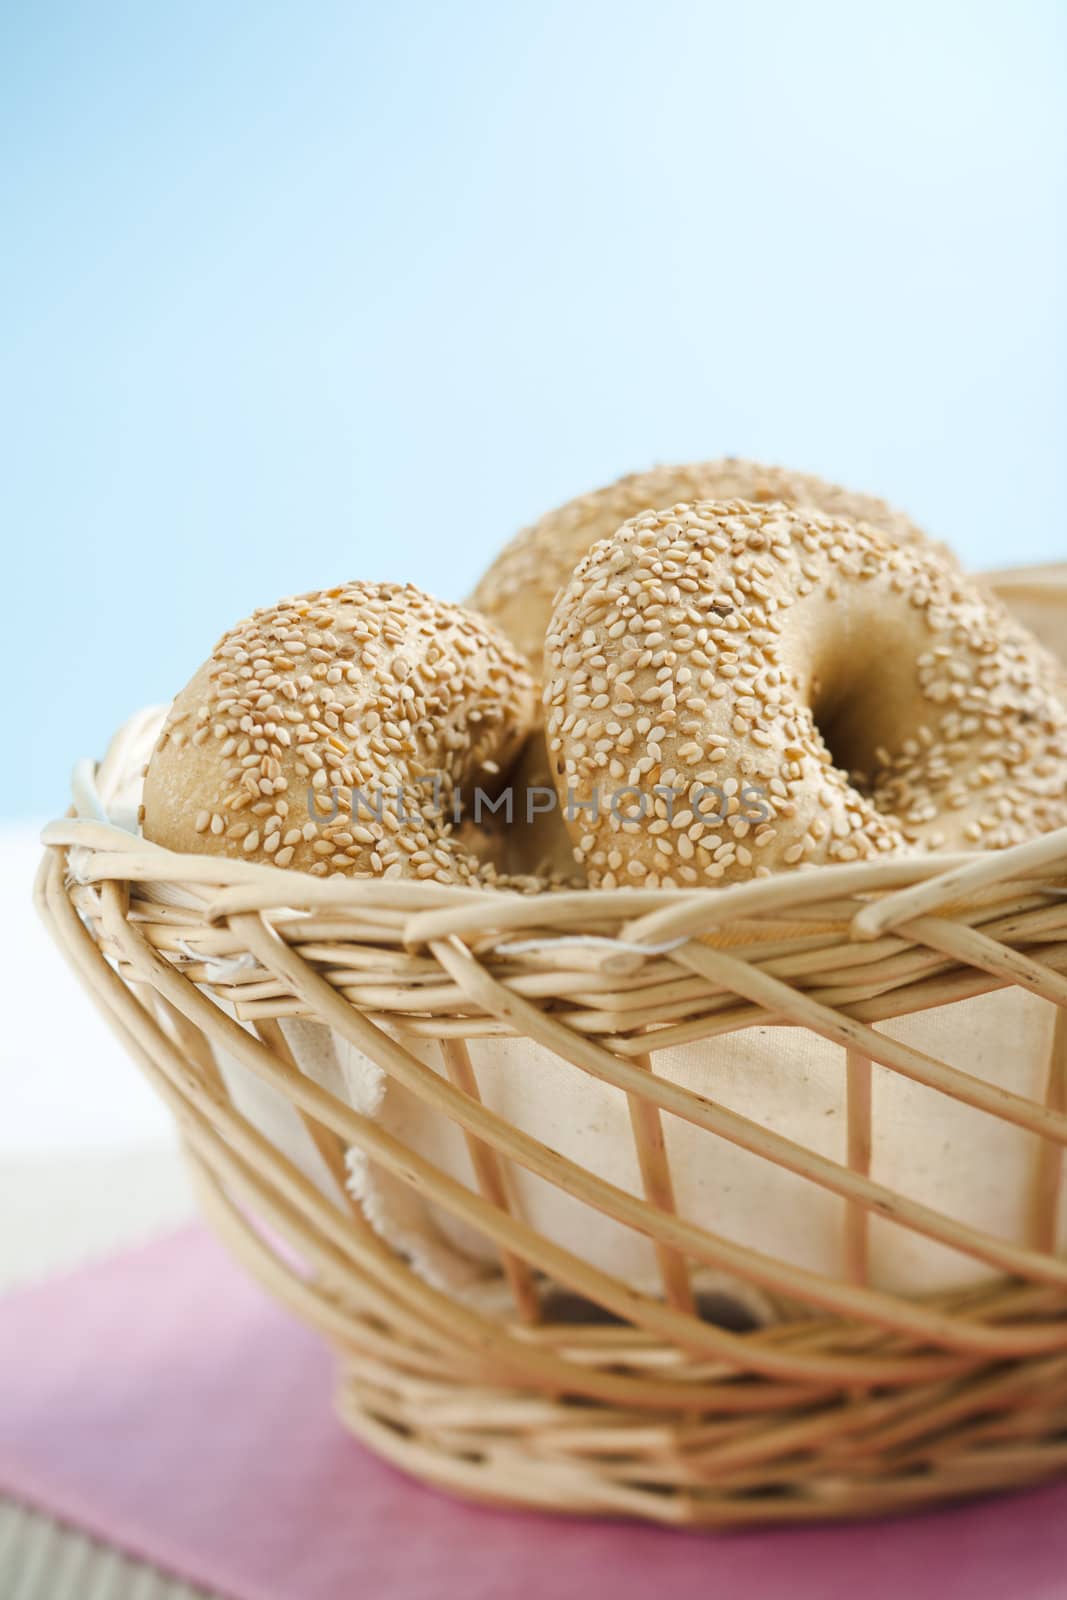 Breakfast bagels on the kitchen table over blue background